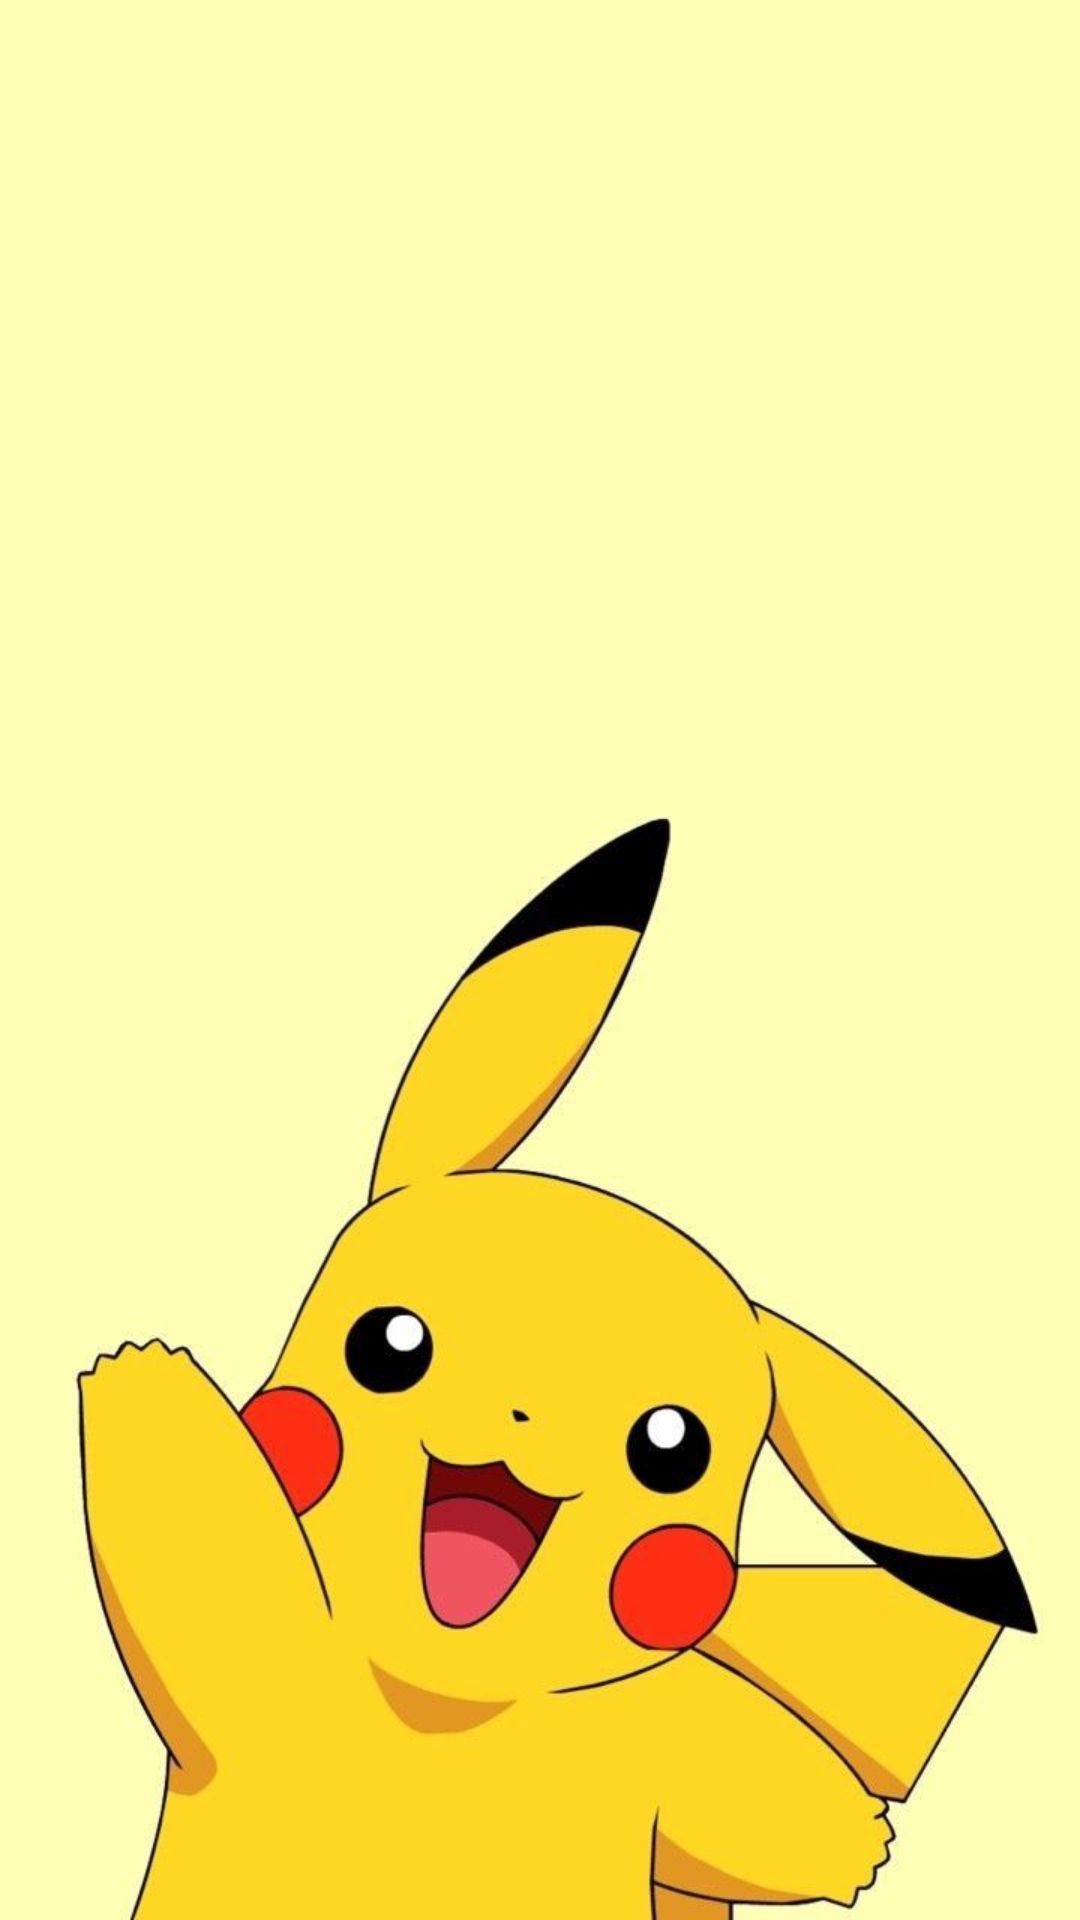 Pokémon iPhone Wallpaper To Download High Quality Pokémon iPhone Wallpaper